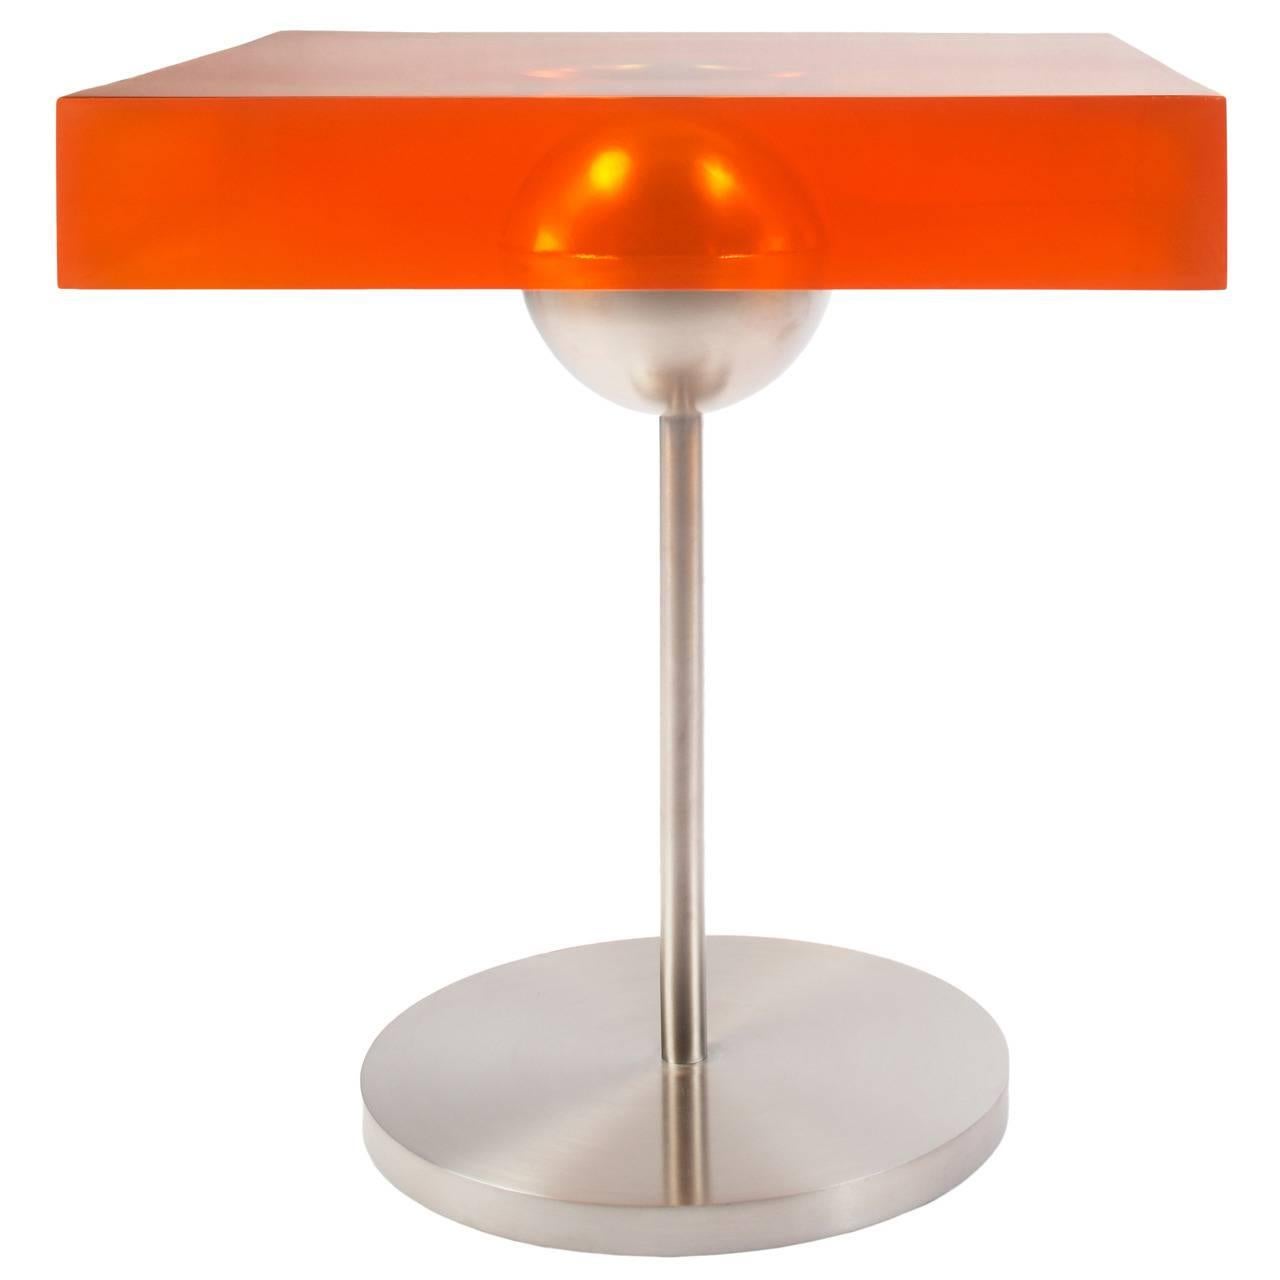 Lollypop Table, Designed by Laurie Beckerman in 2007